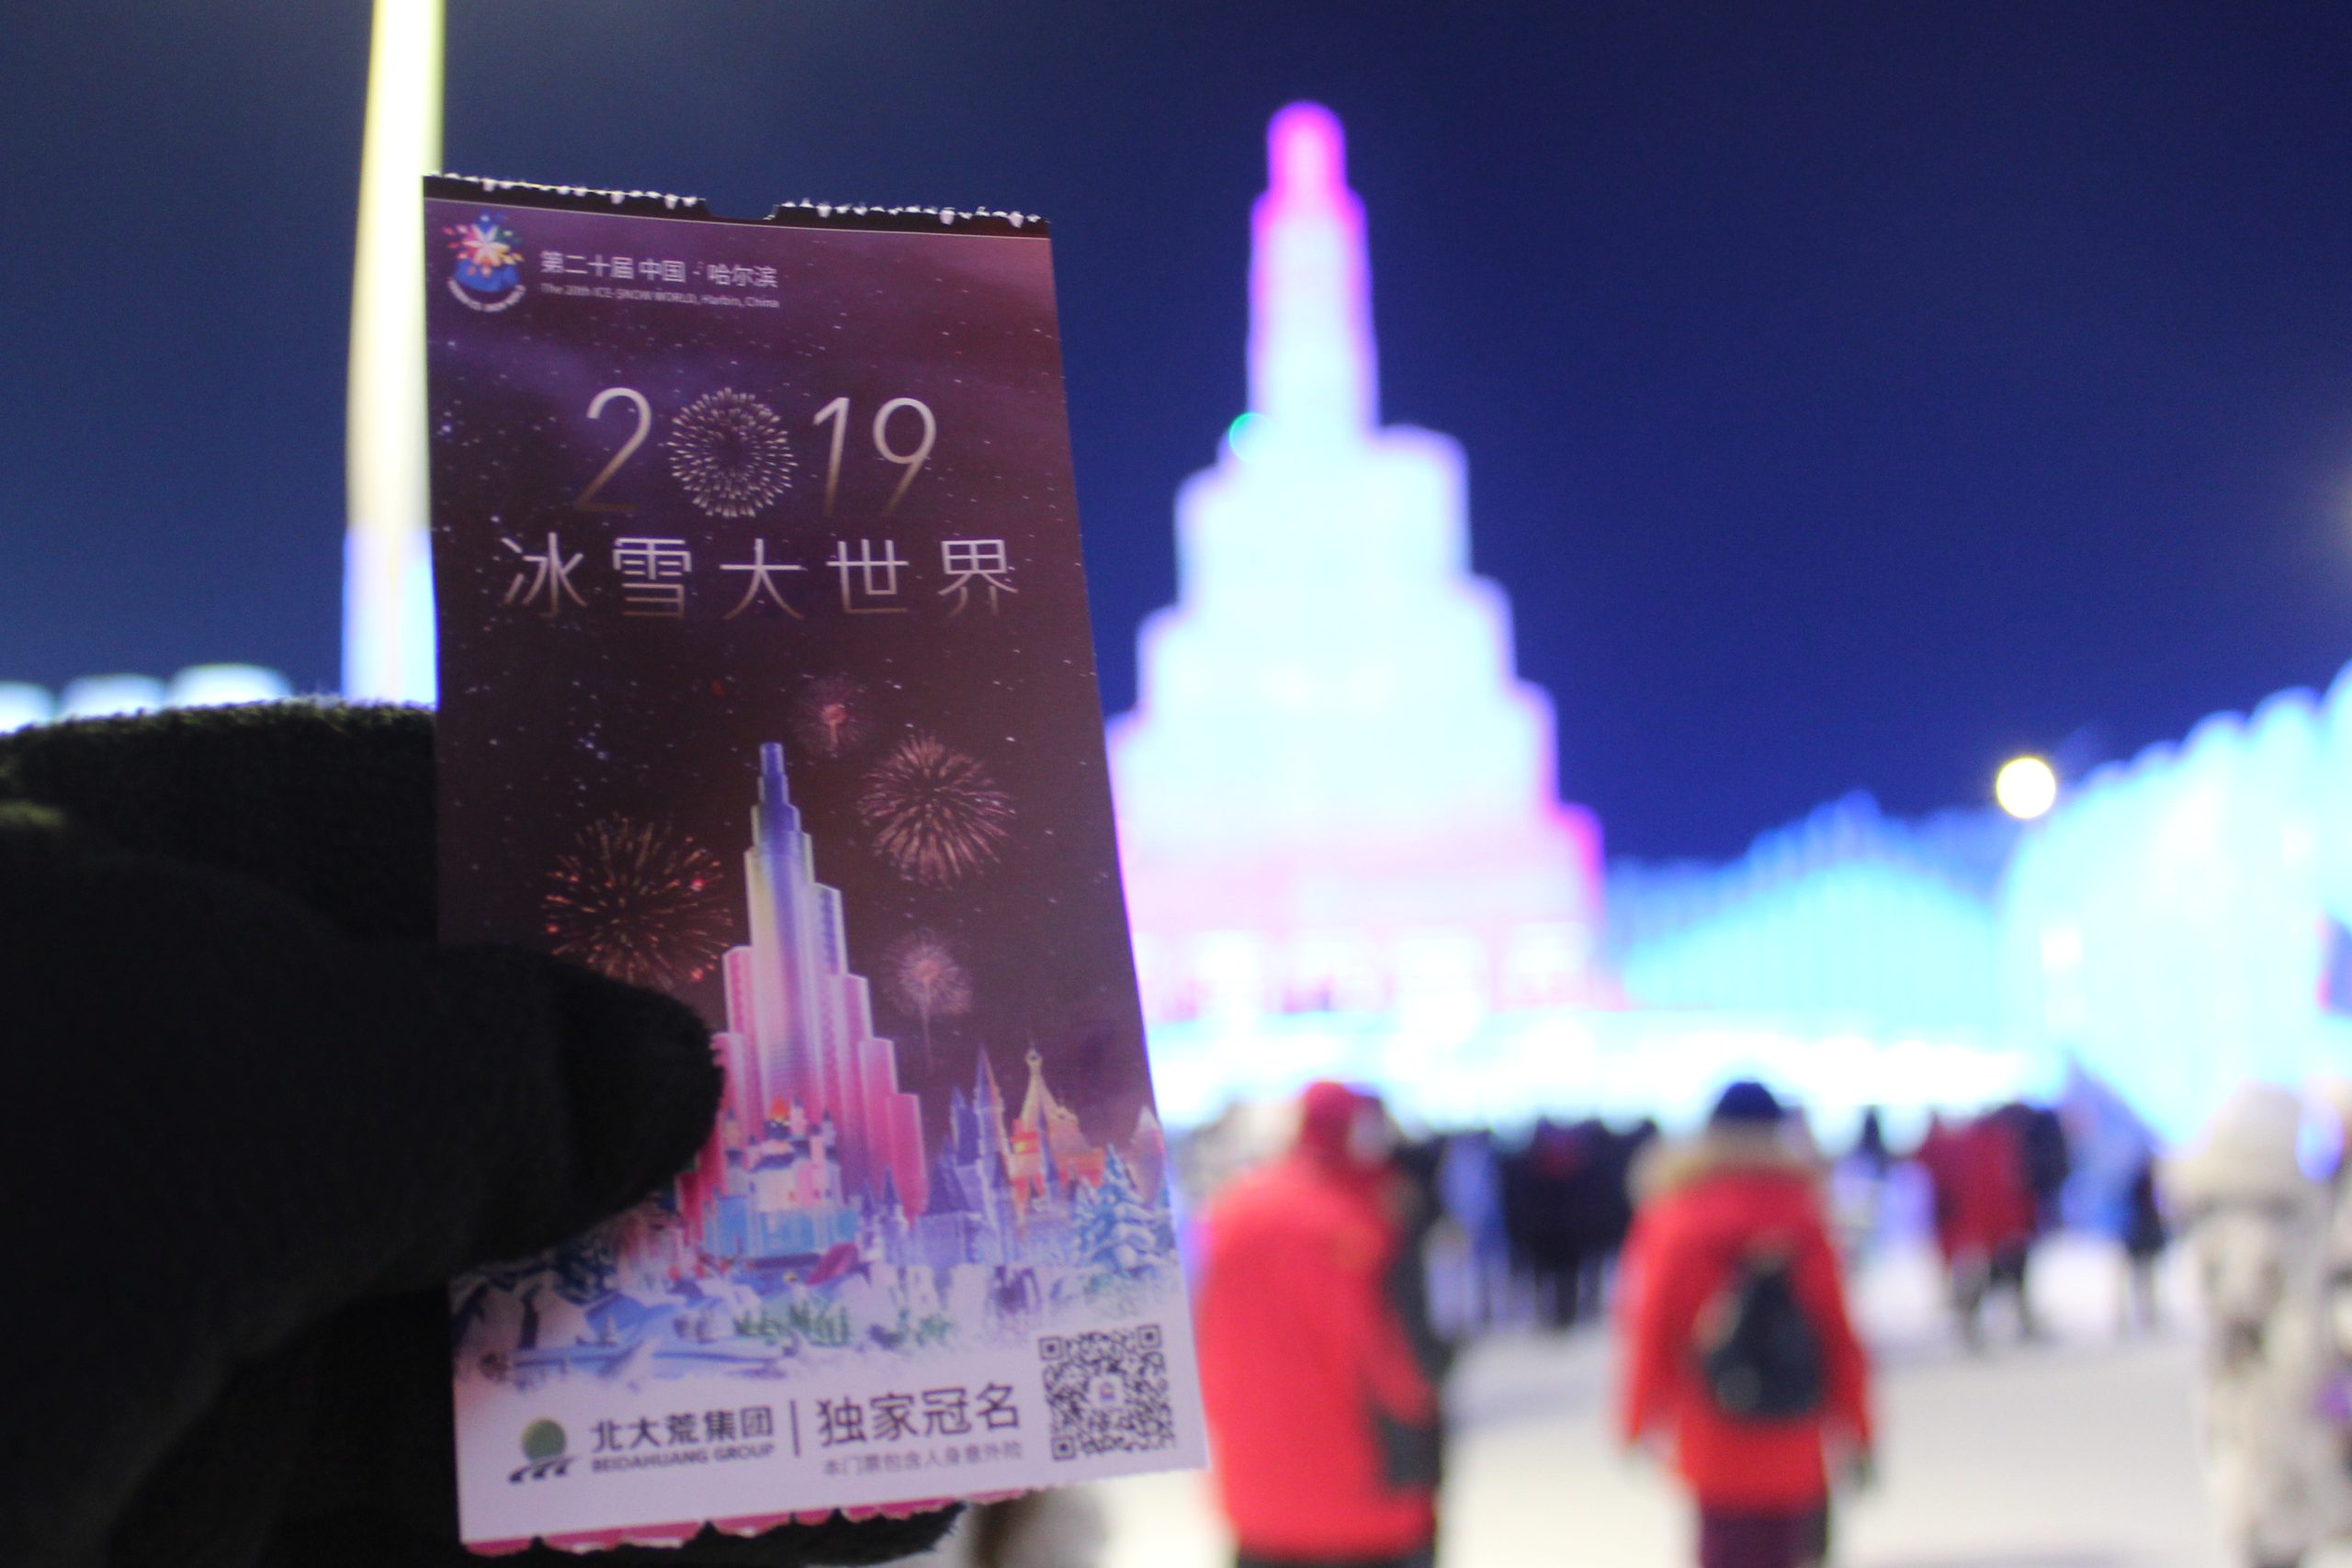 Ticket to Harbin's International Ice and Snow Festival